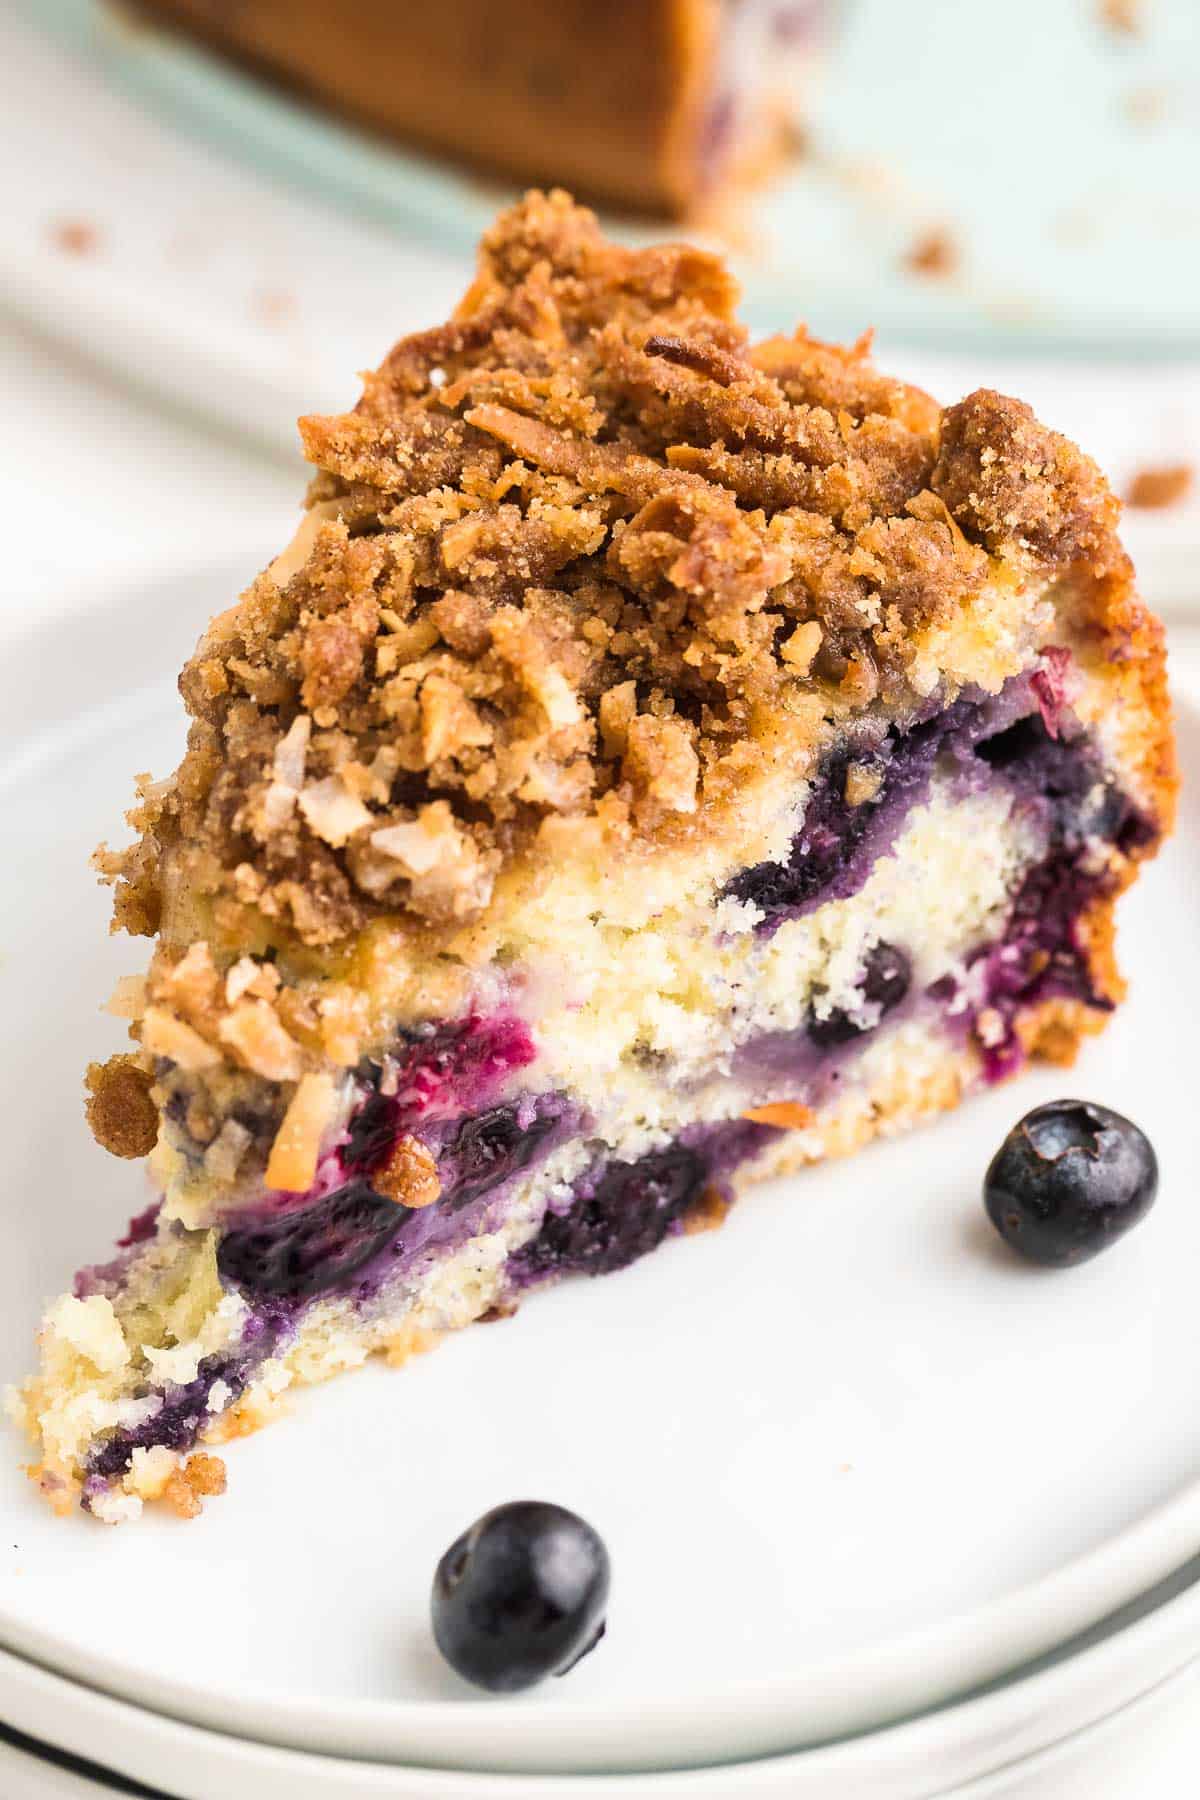 A slice of freshly baked Blueberry Coffee Cake on a white plate.